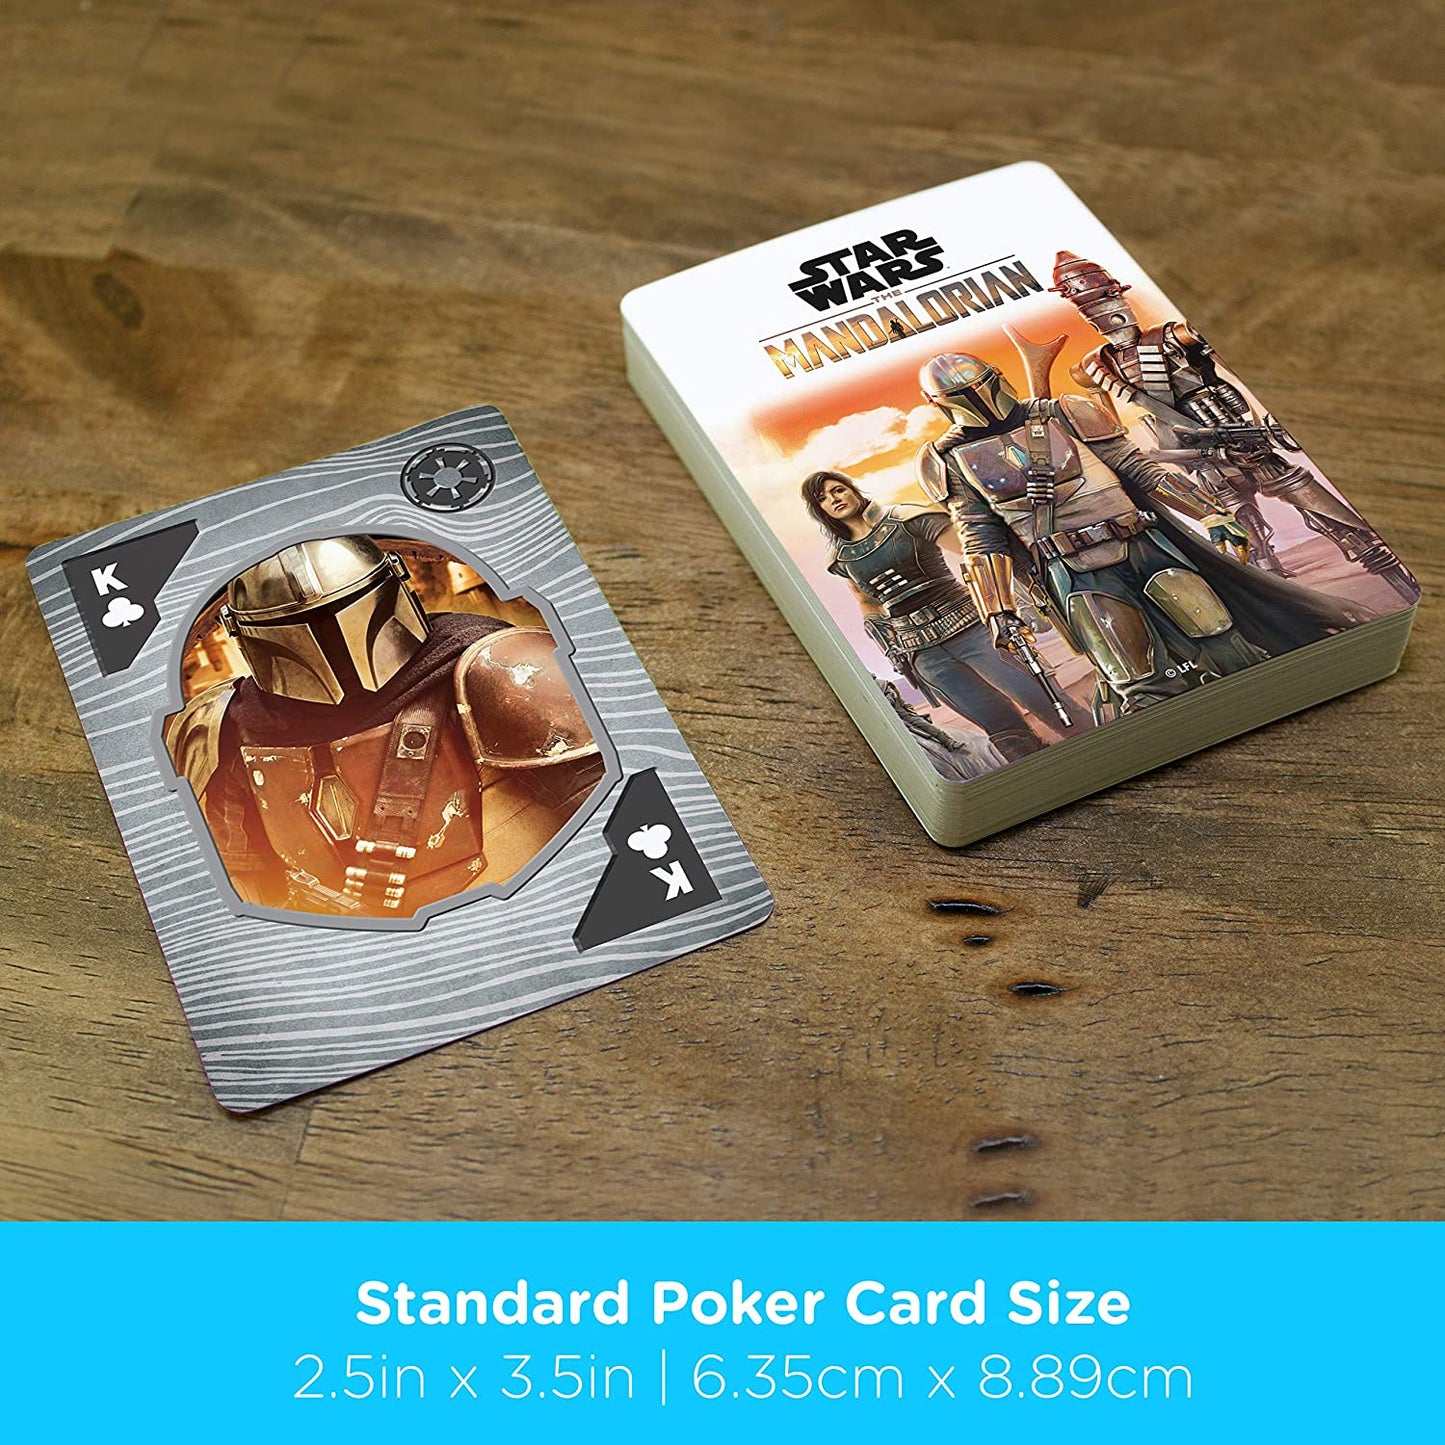 Star Wars Playing Cards - The Mandalorian Themed Deck of Cards for Your Favorite Card Games - Officially Licensed Star Wars Merchandise & Collectibles